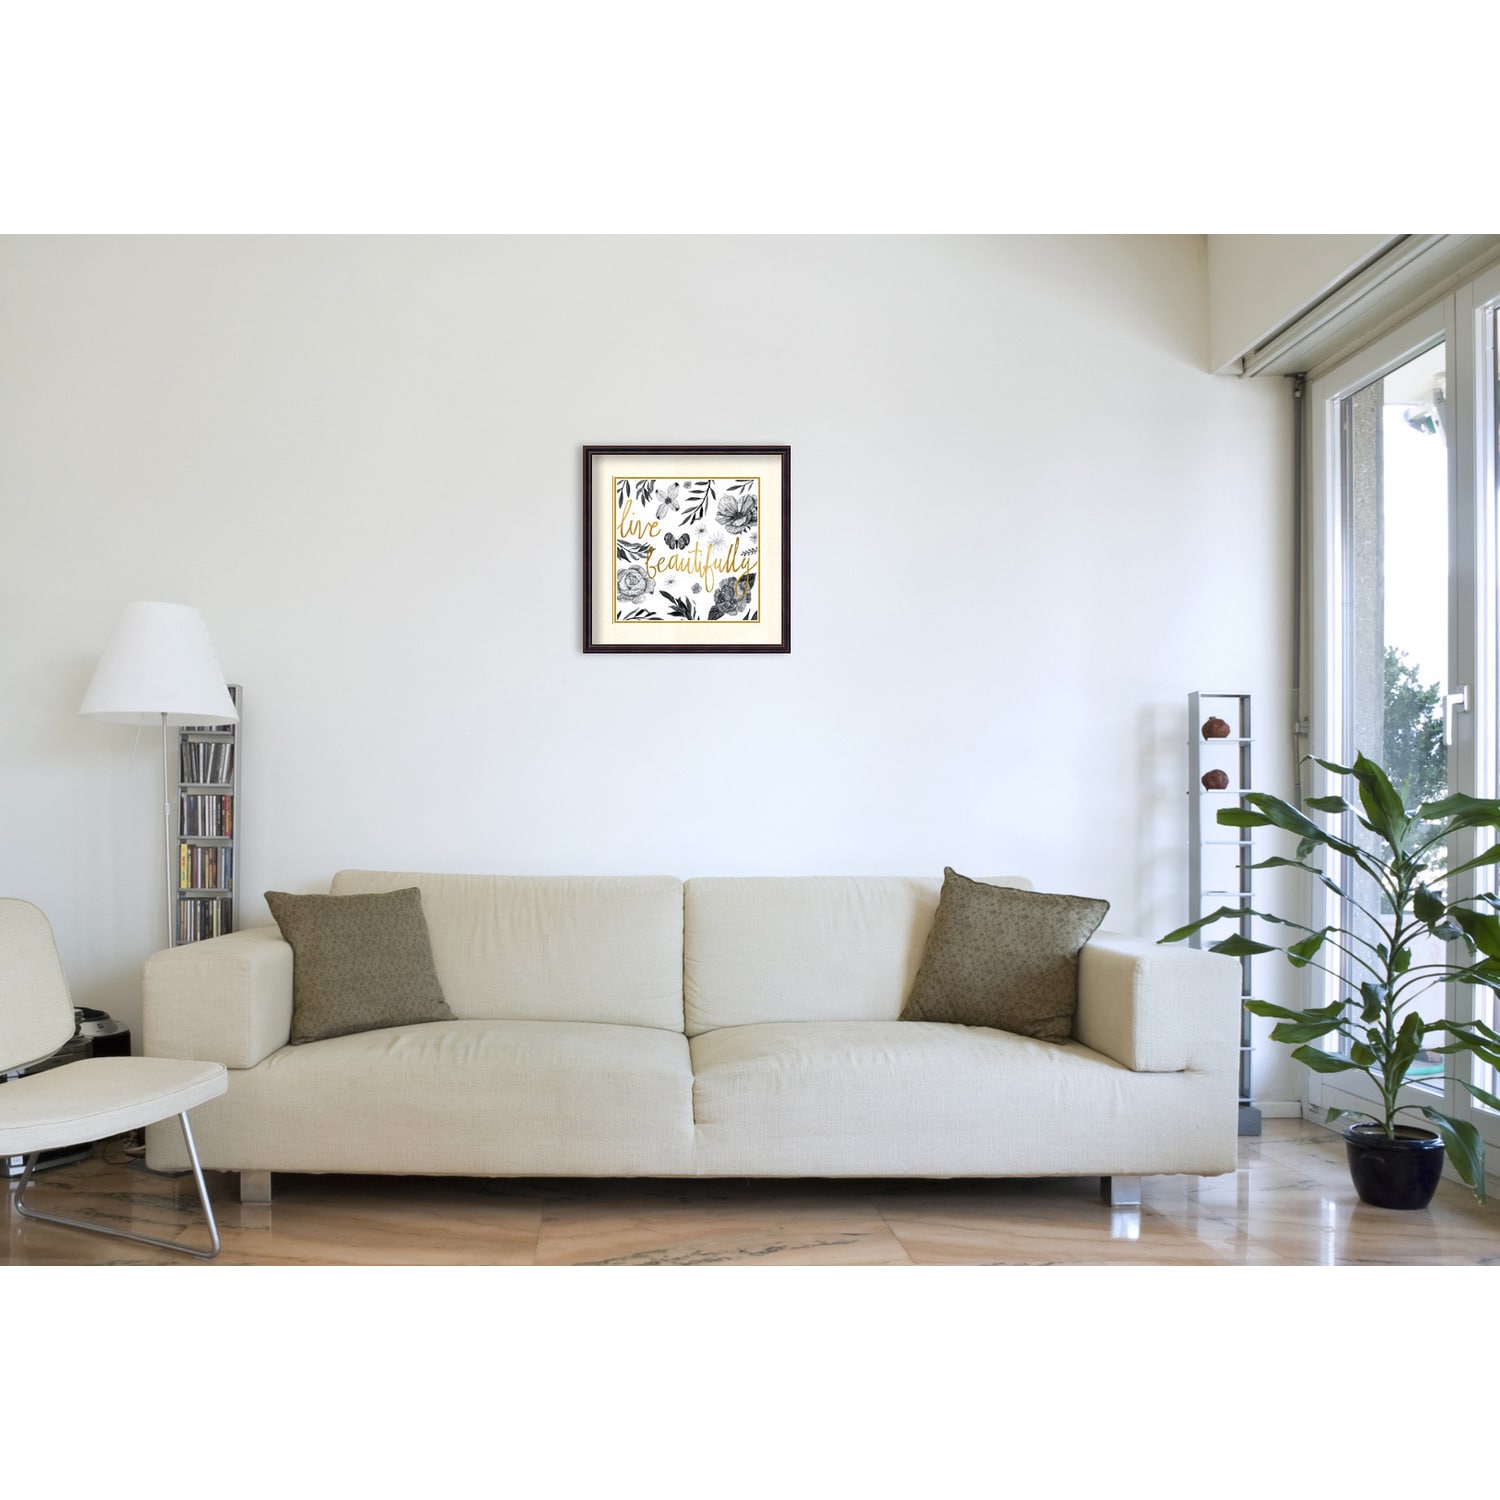 Living Room By Live Beautifully shop sarah zieve miller live beautifully framed art print 24 x 24 inch free shipping today overstock 10481756